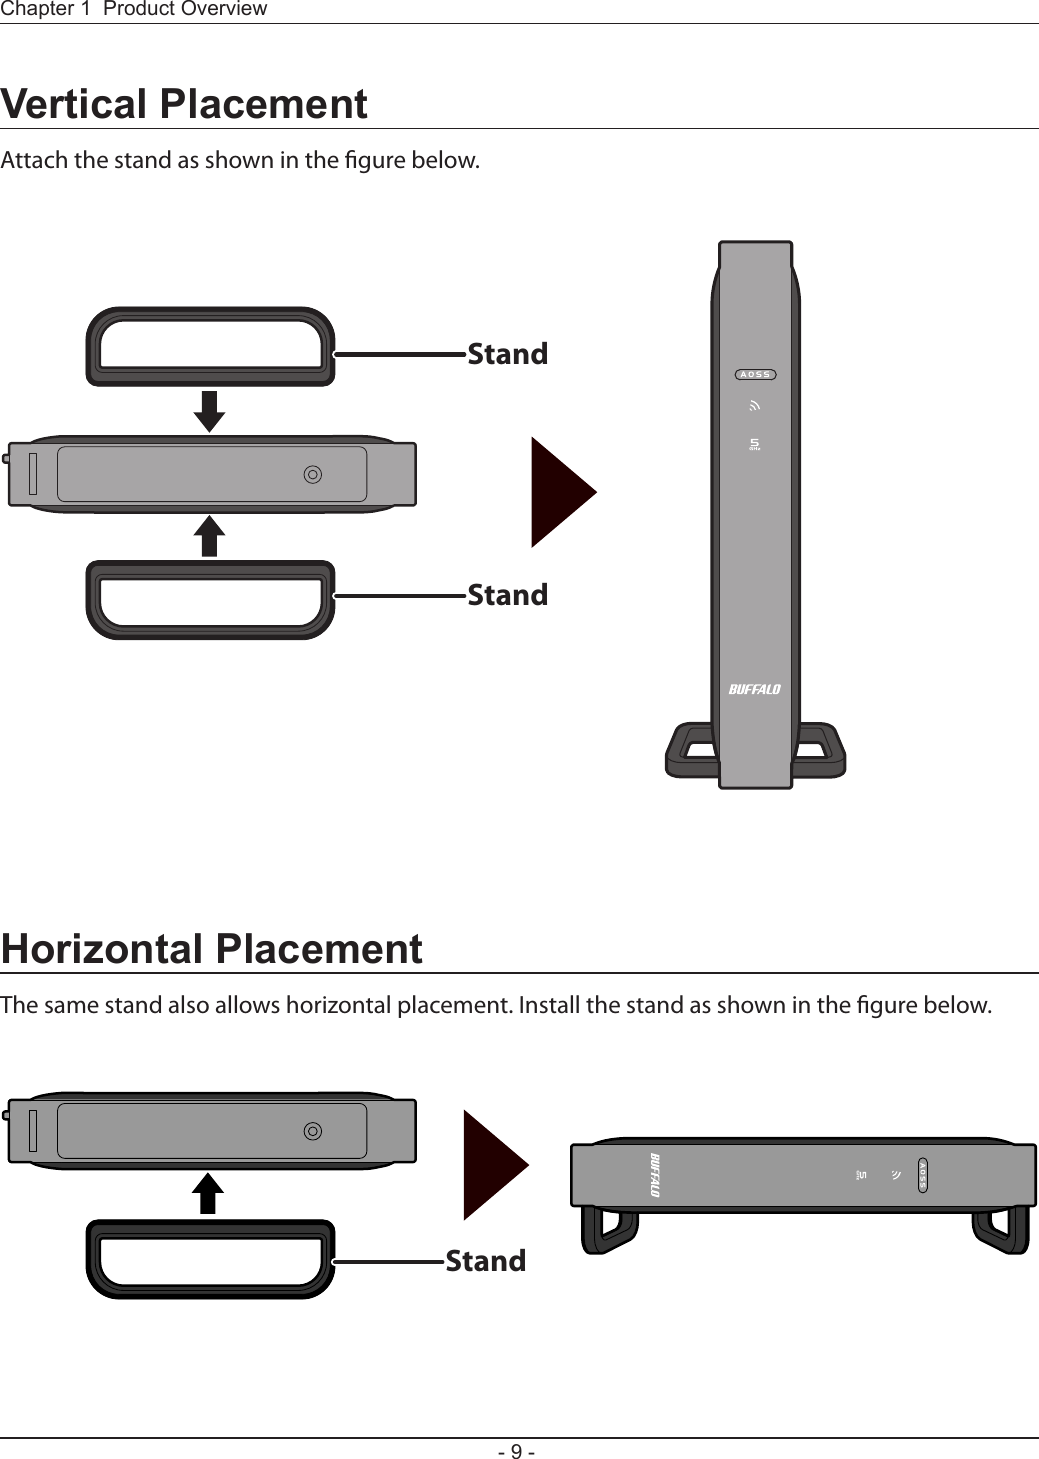 StandStandStandChapter 1  Product Overview- 9 -Vertical PlacementAttach the stand as shown in the gure below.Horizontal PlacementThe same stand also allows horizontal placement. Install the stand as shown in the gure below.